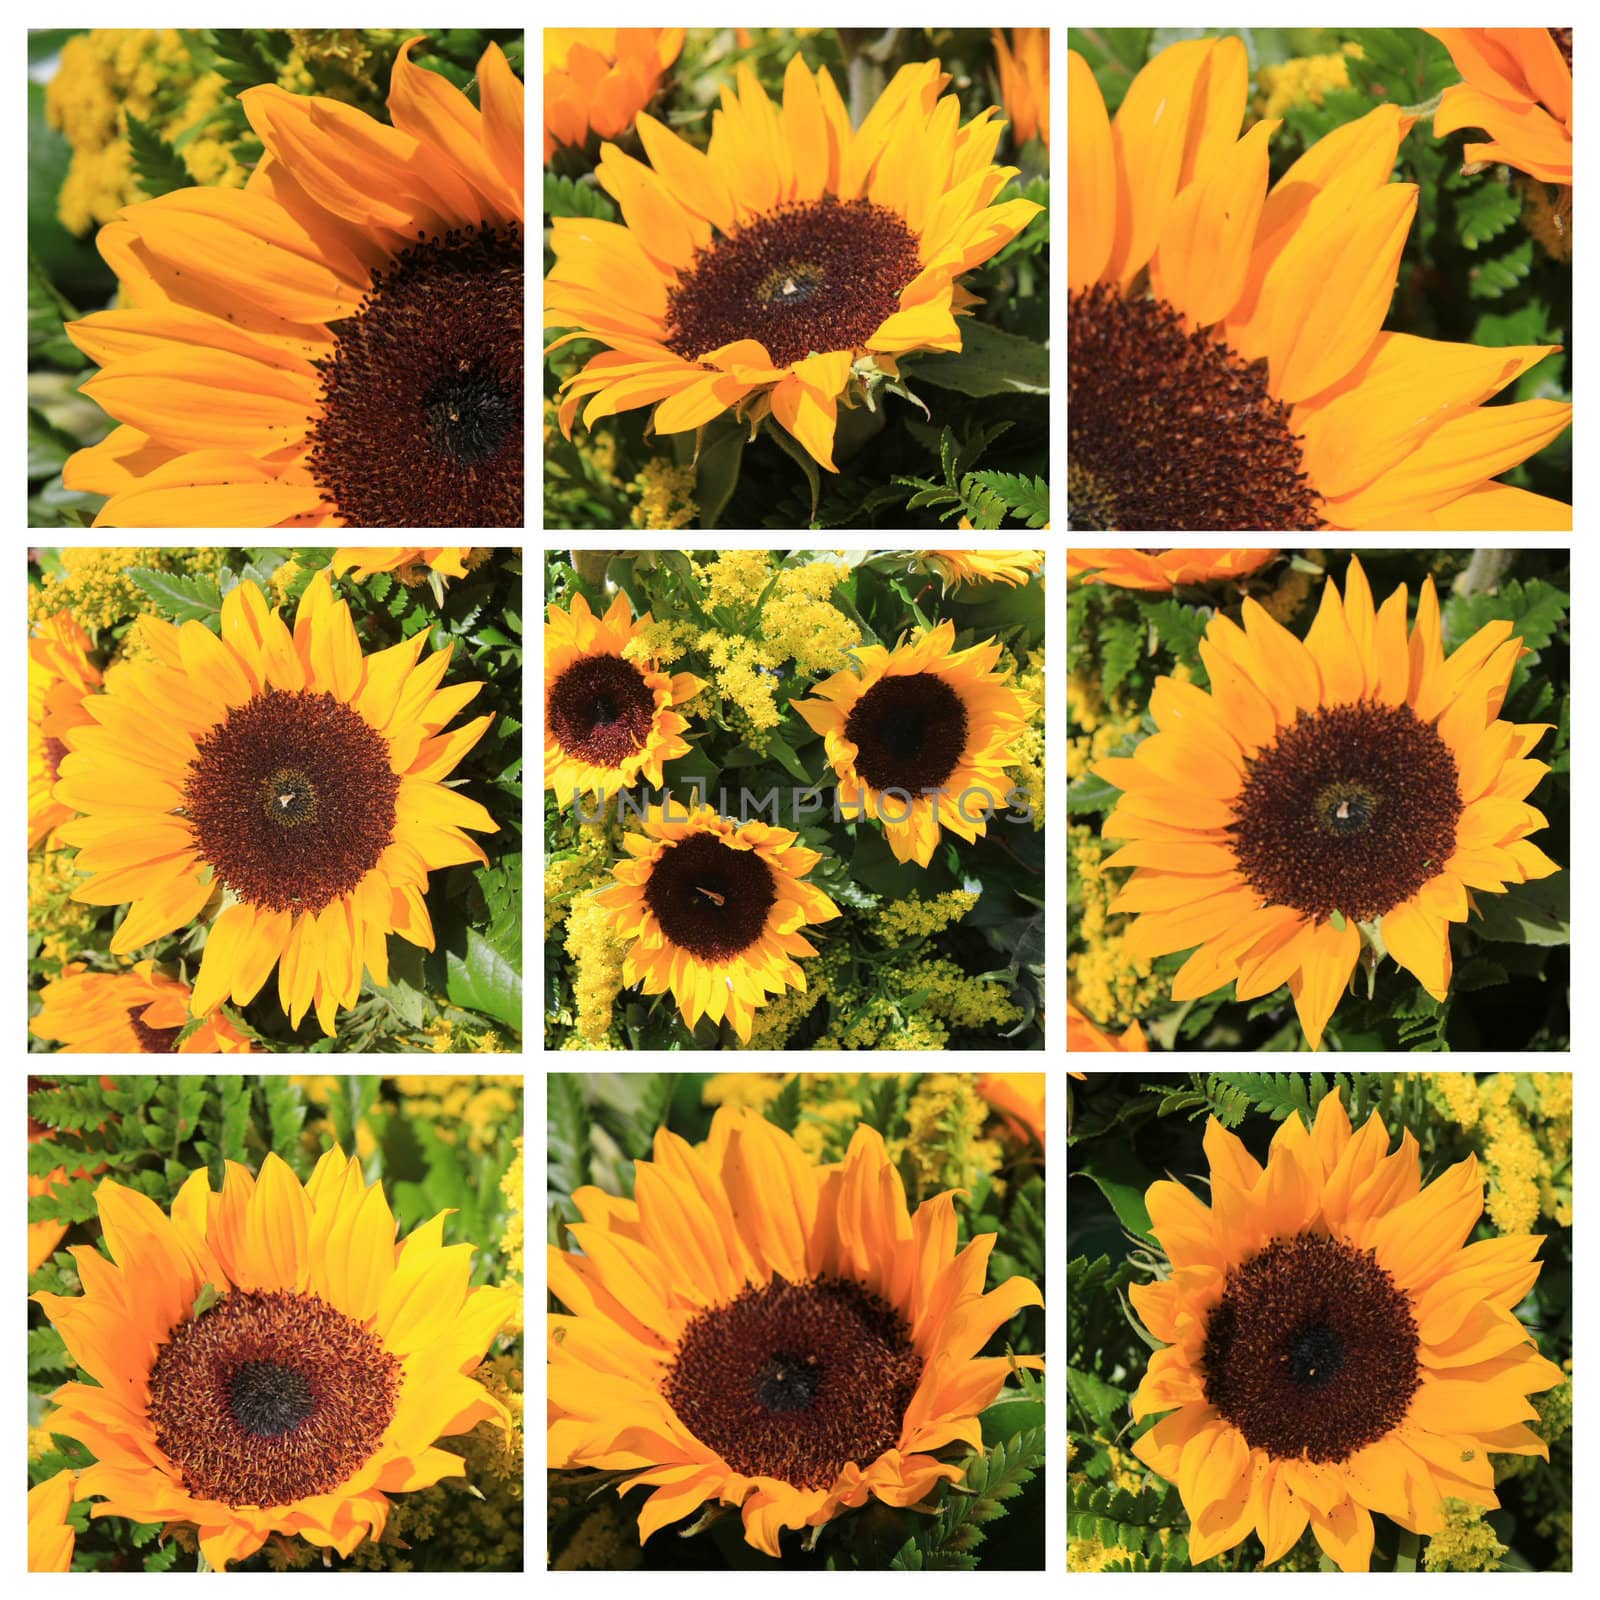 Nine different yellow sunflower images in a high resolution collage